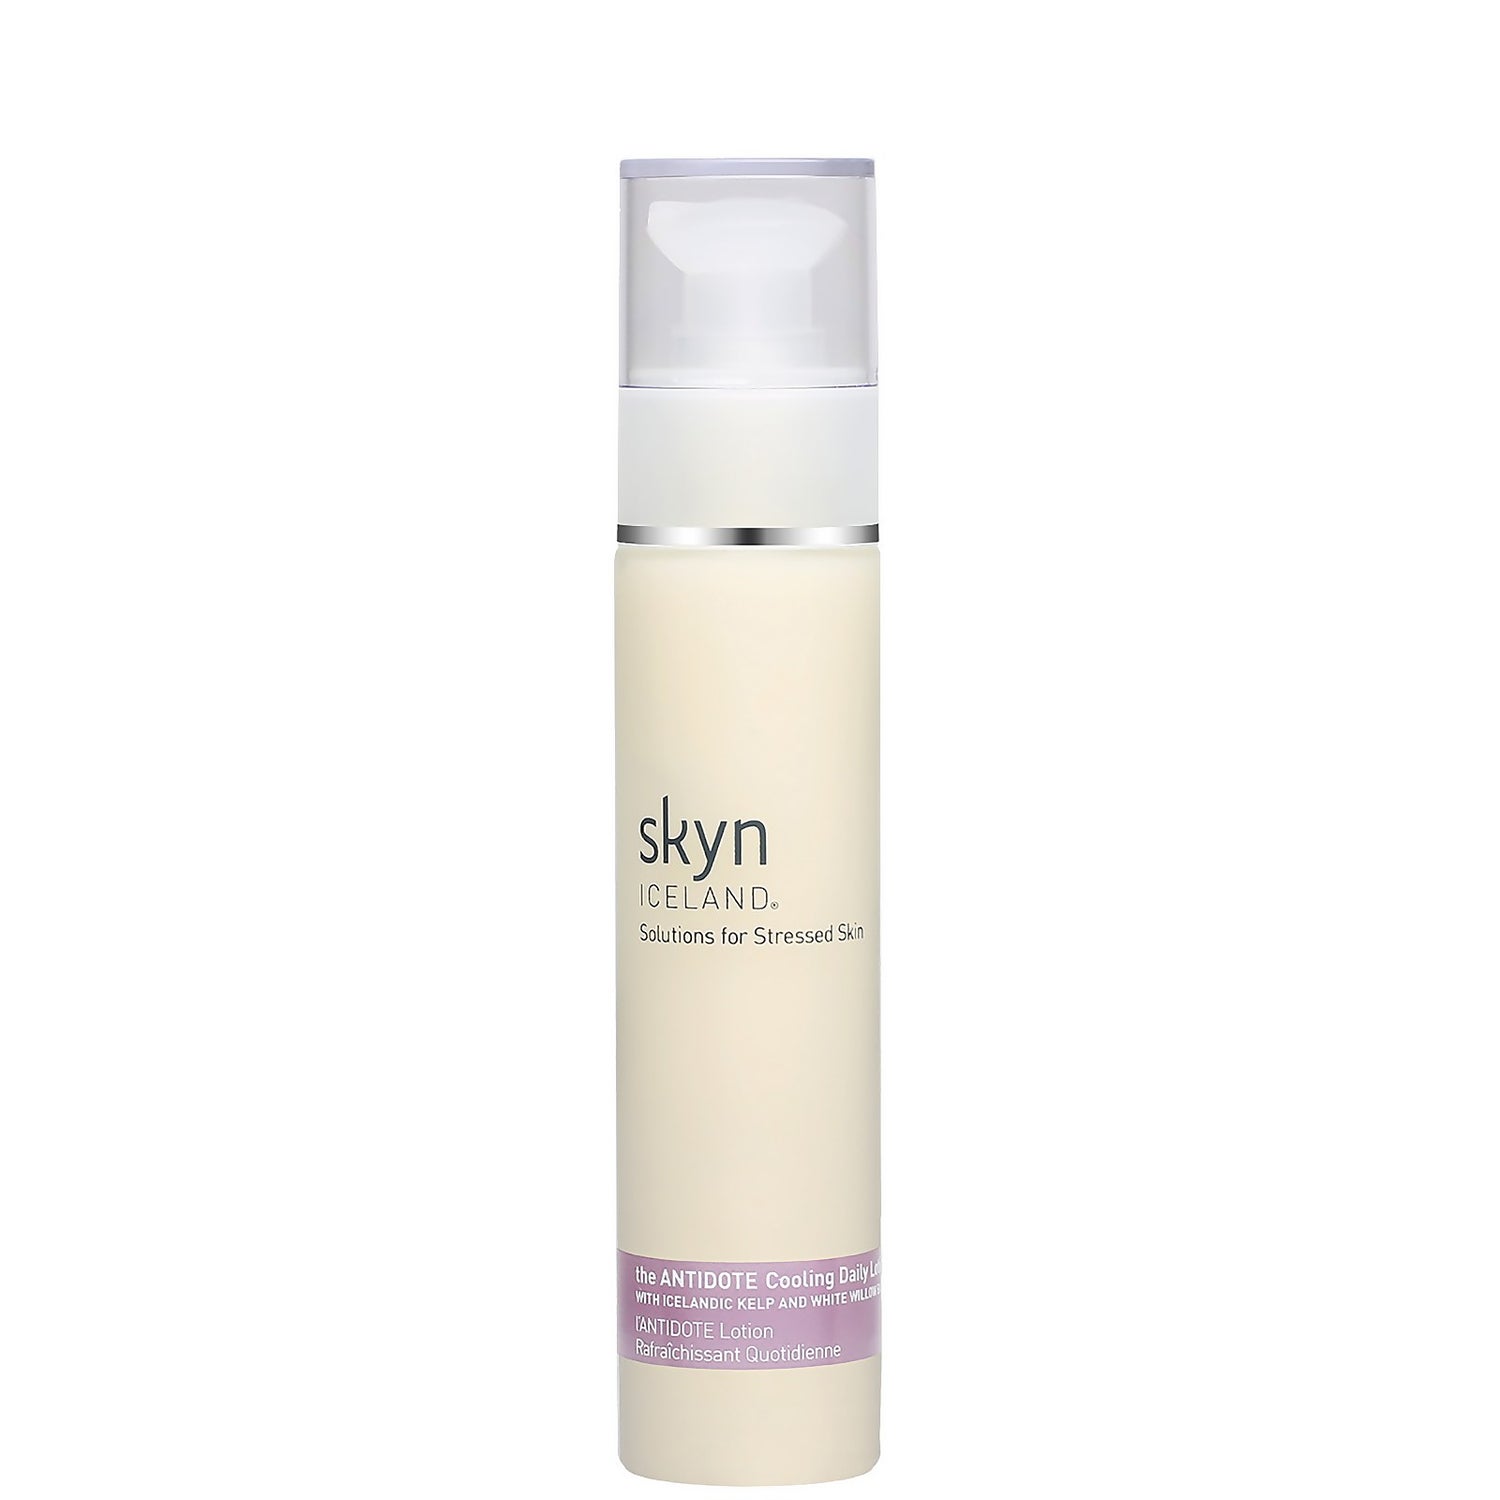 skyn ICELAND The Antidote Cooling Daily Lotion 50ml